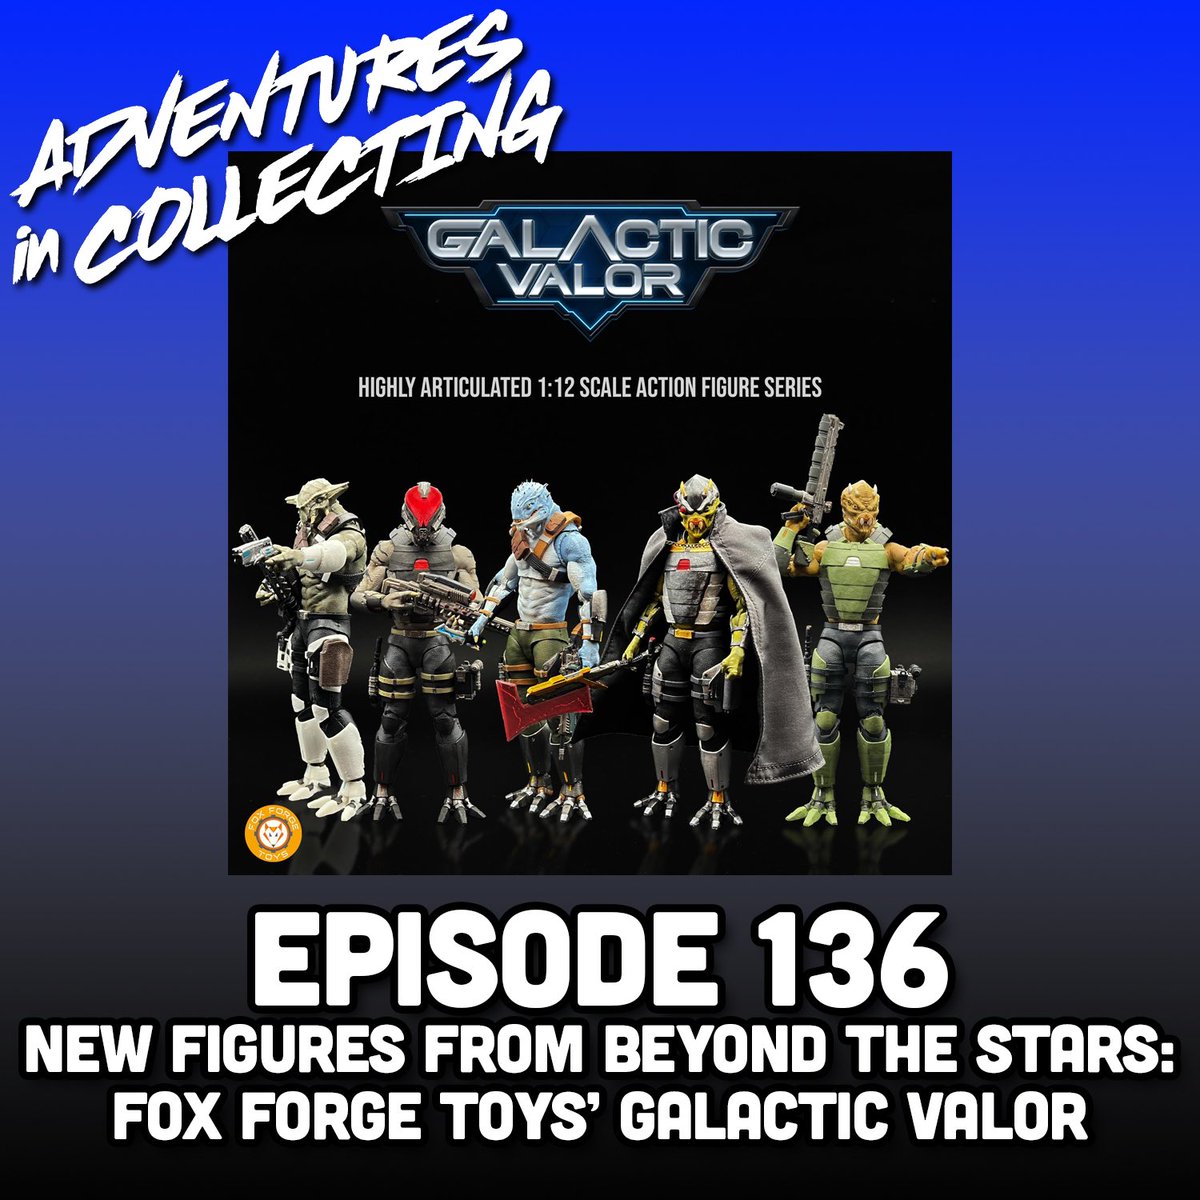 🚨NEW EPISODE🚨

Listen to this week’s episode w/ James of @foxforgetoys as we discuss all you need to know about #GalacticValor! Available wherever you enjoy #podcasts or at the link below & back the campaign on kickstarter.com. 

podcasts.apple.com/us/podcast/adv…

#madeonzencastr